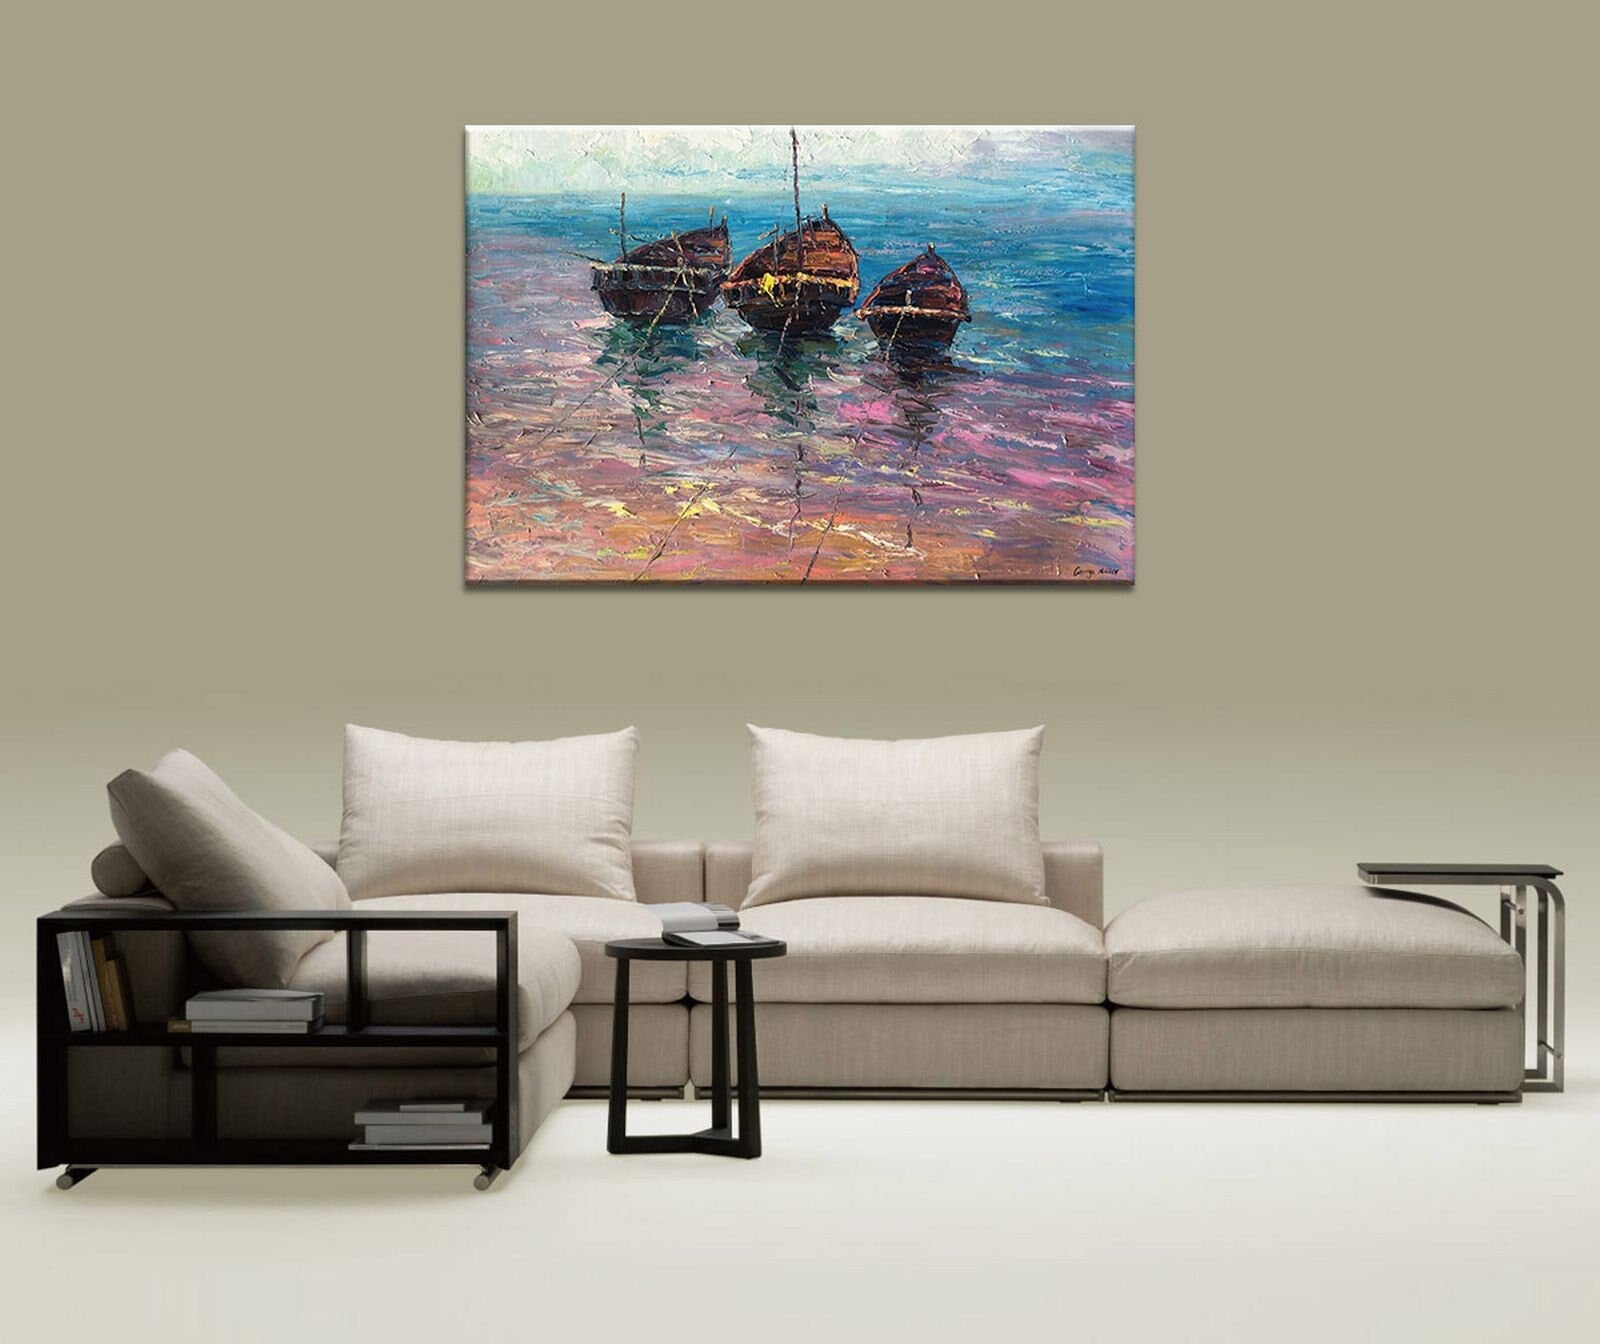 Original Oil Painting Moored Fishing Boat, Wall Art Painting, Abstract Painting Seascape, Extra Large Abstract Painting, Handmade Painting